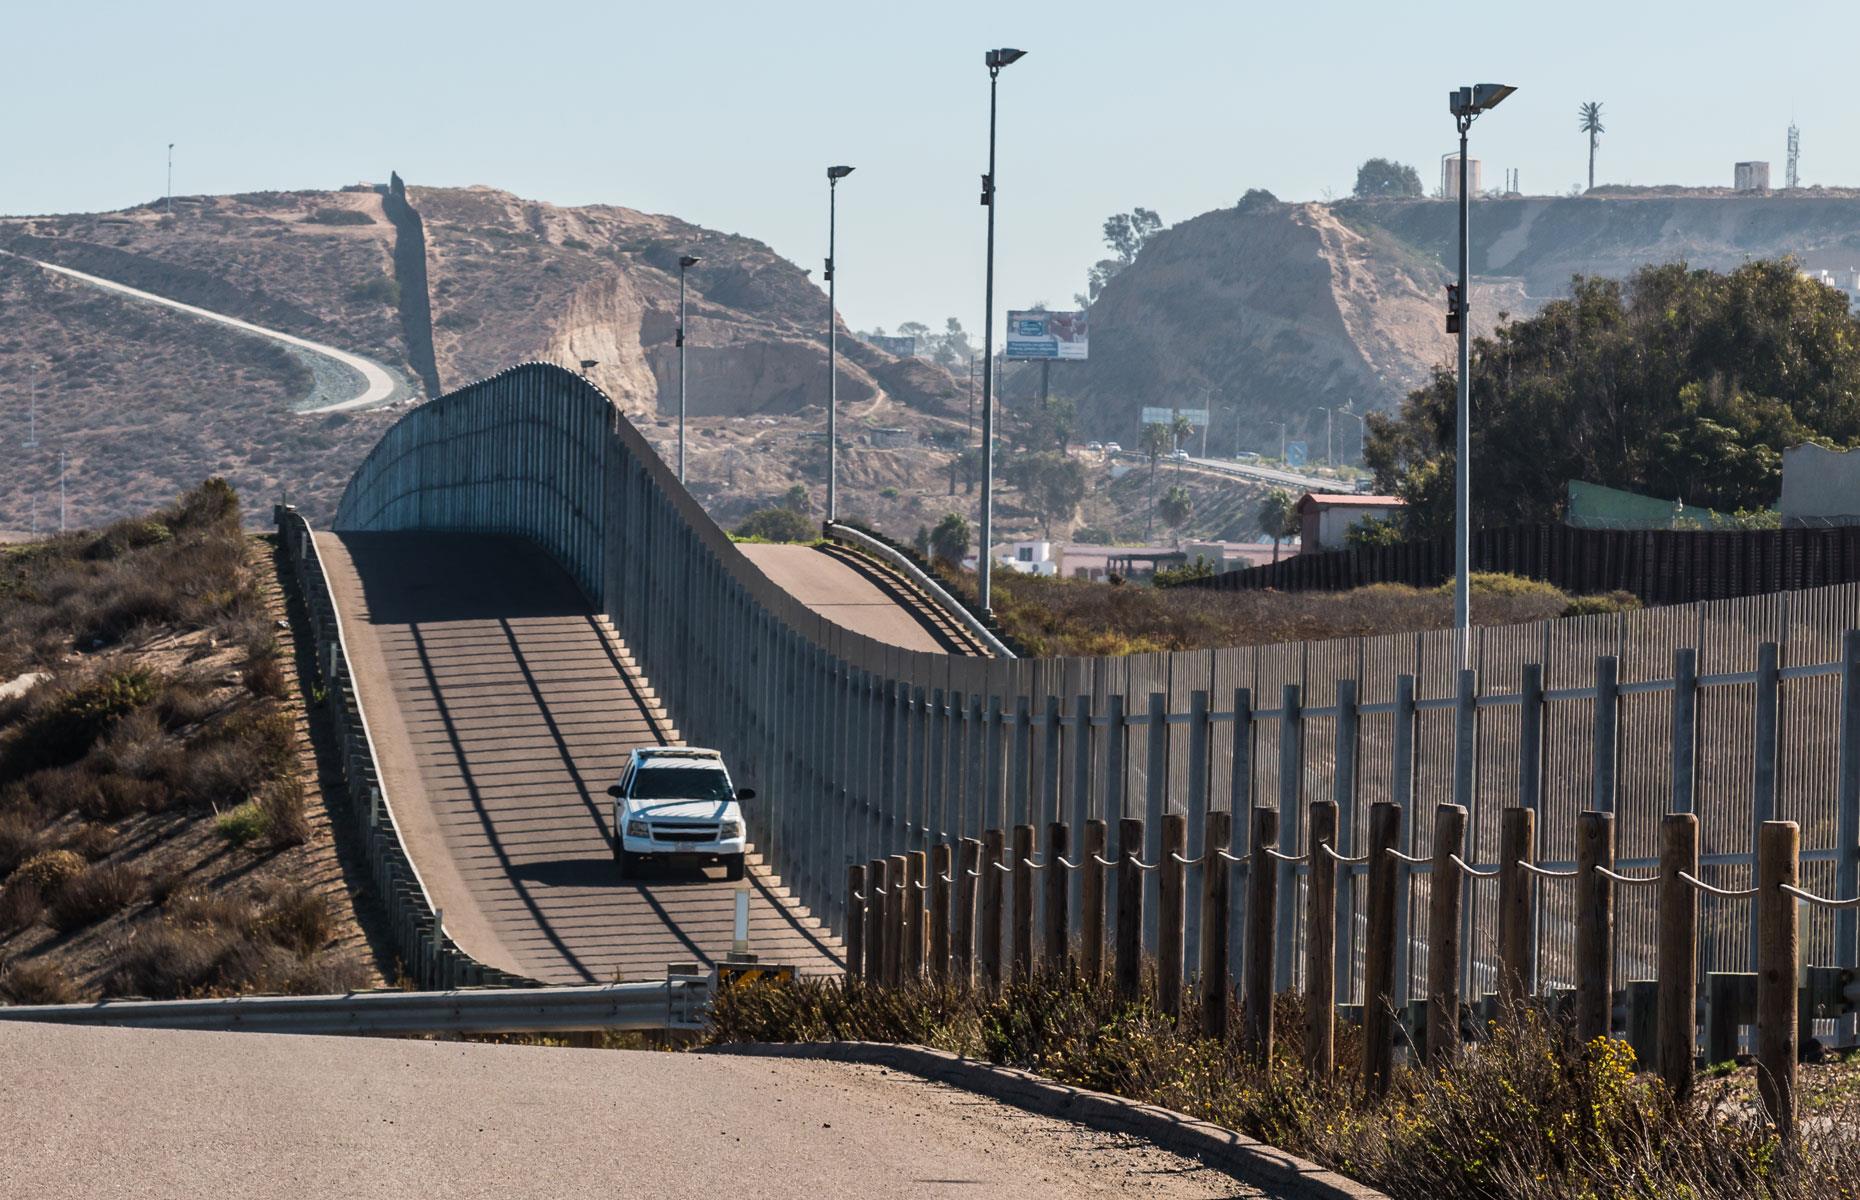 US Department of Homeland Security's Secure Border Initiative, money wasted: $1.15 billion